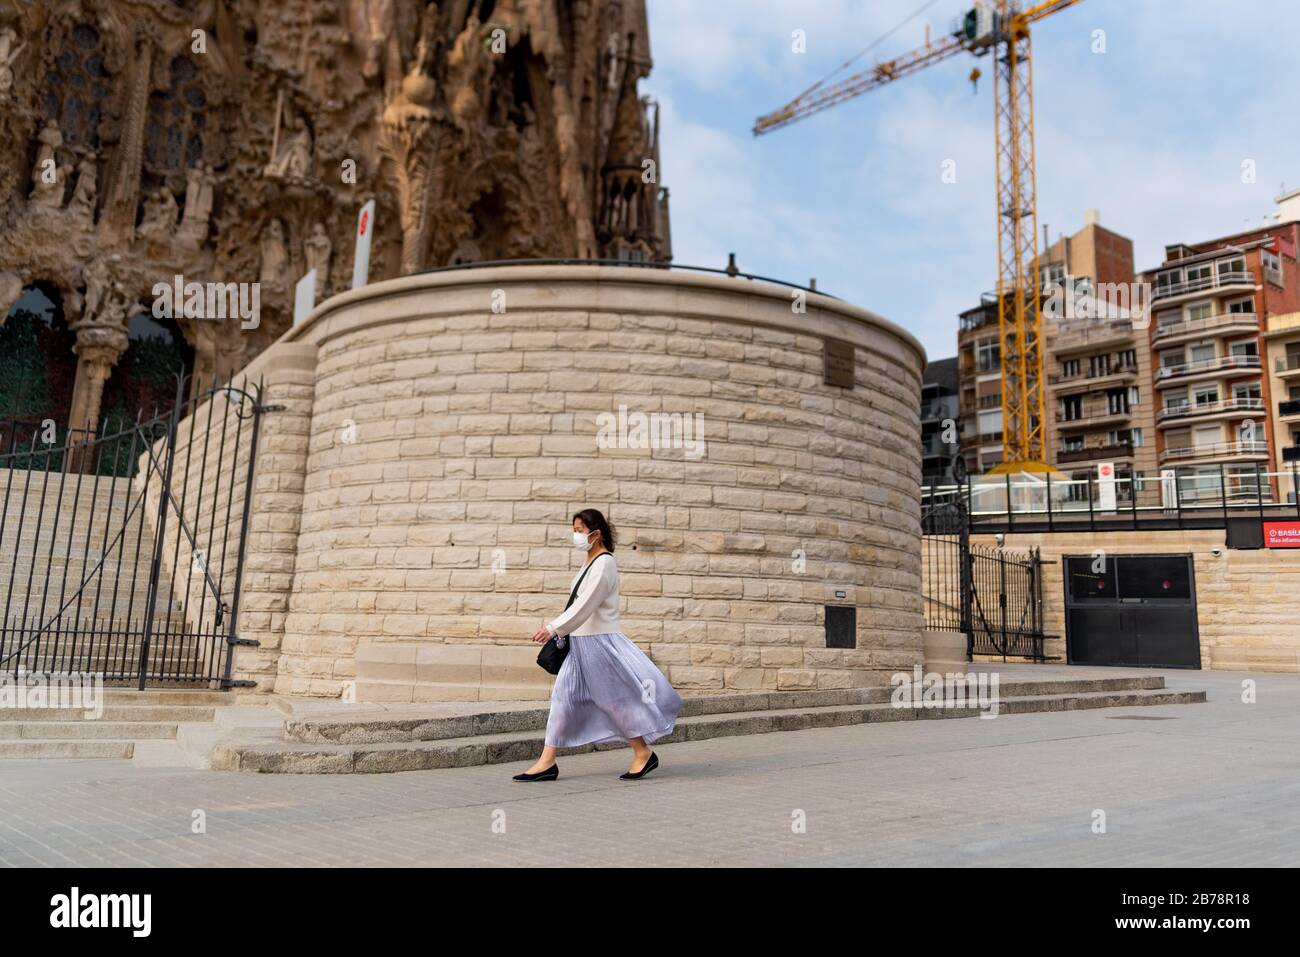 Barcelona, Spain - 14 march 2020: an asian woman walking by the sagrada familia monument wearing protective face mask during the corona virus outbreak Stock Photo